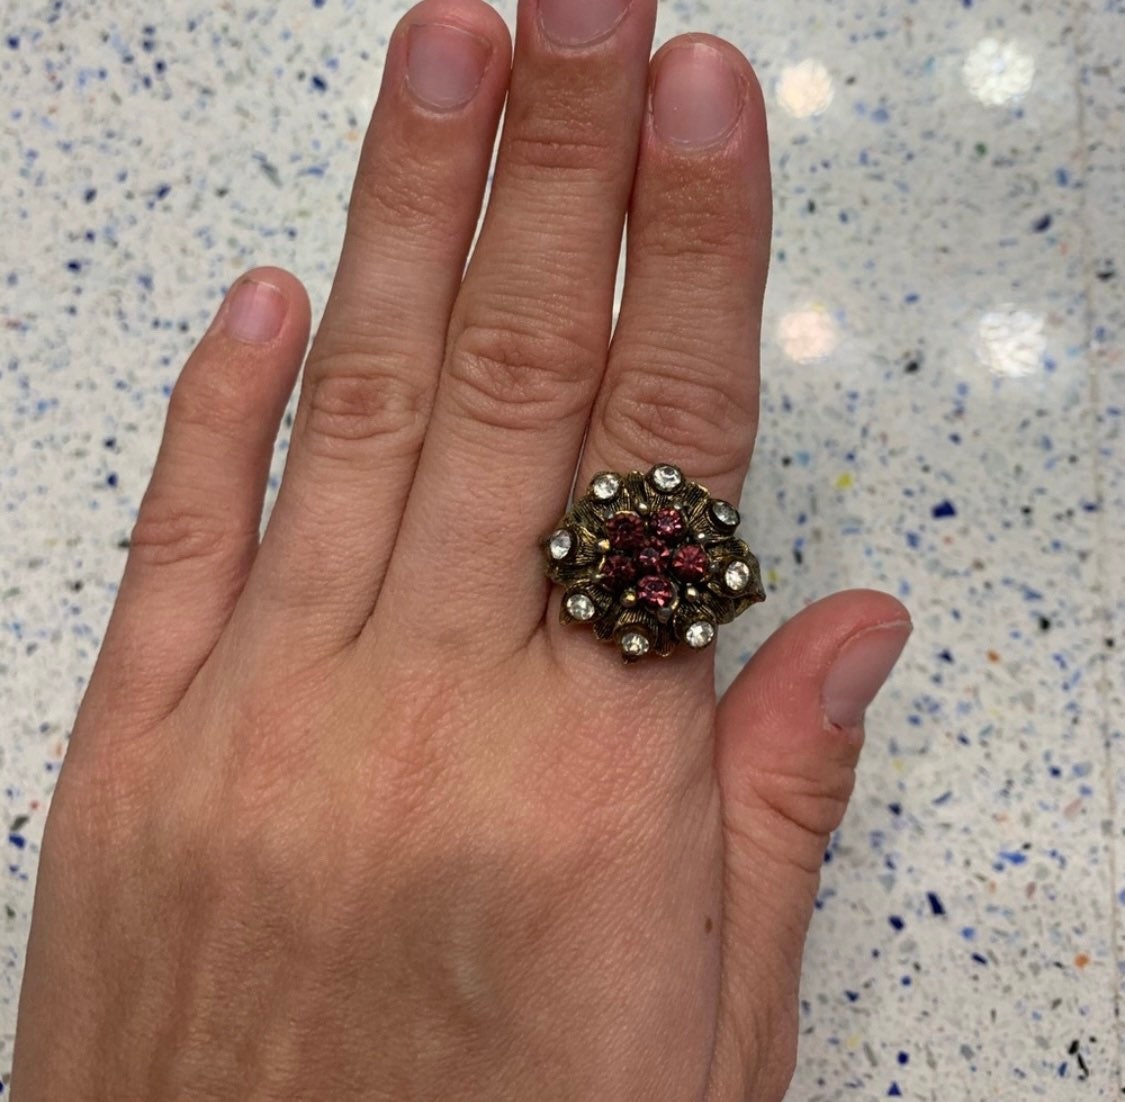 Are these rings costume jewelry? : r/jewelry